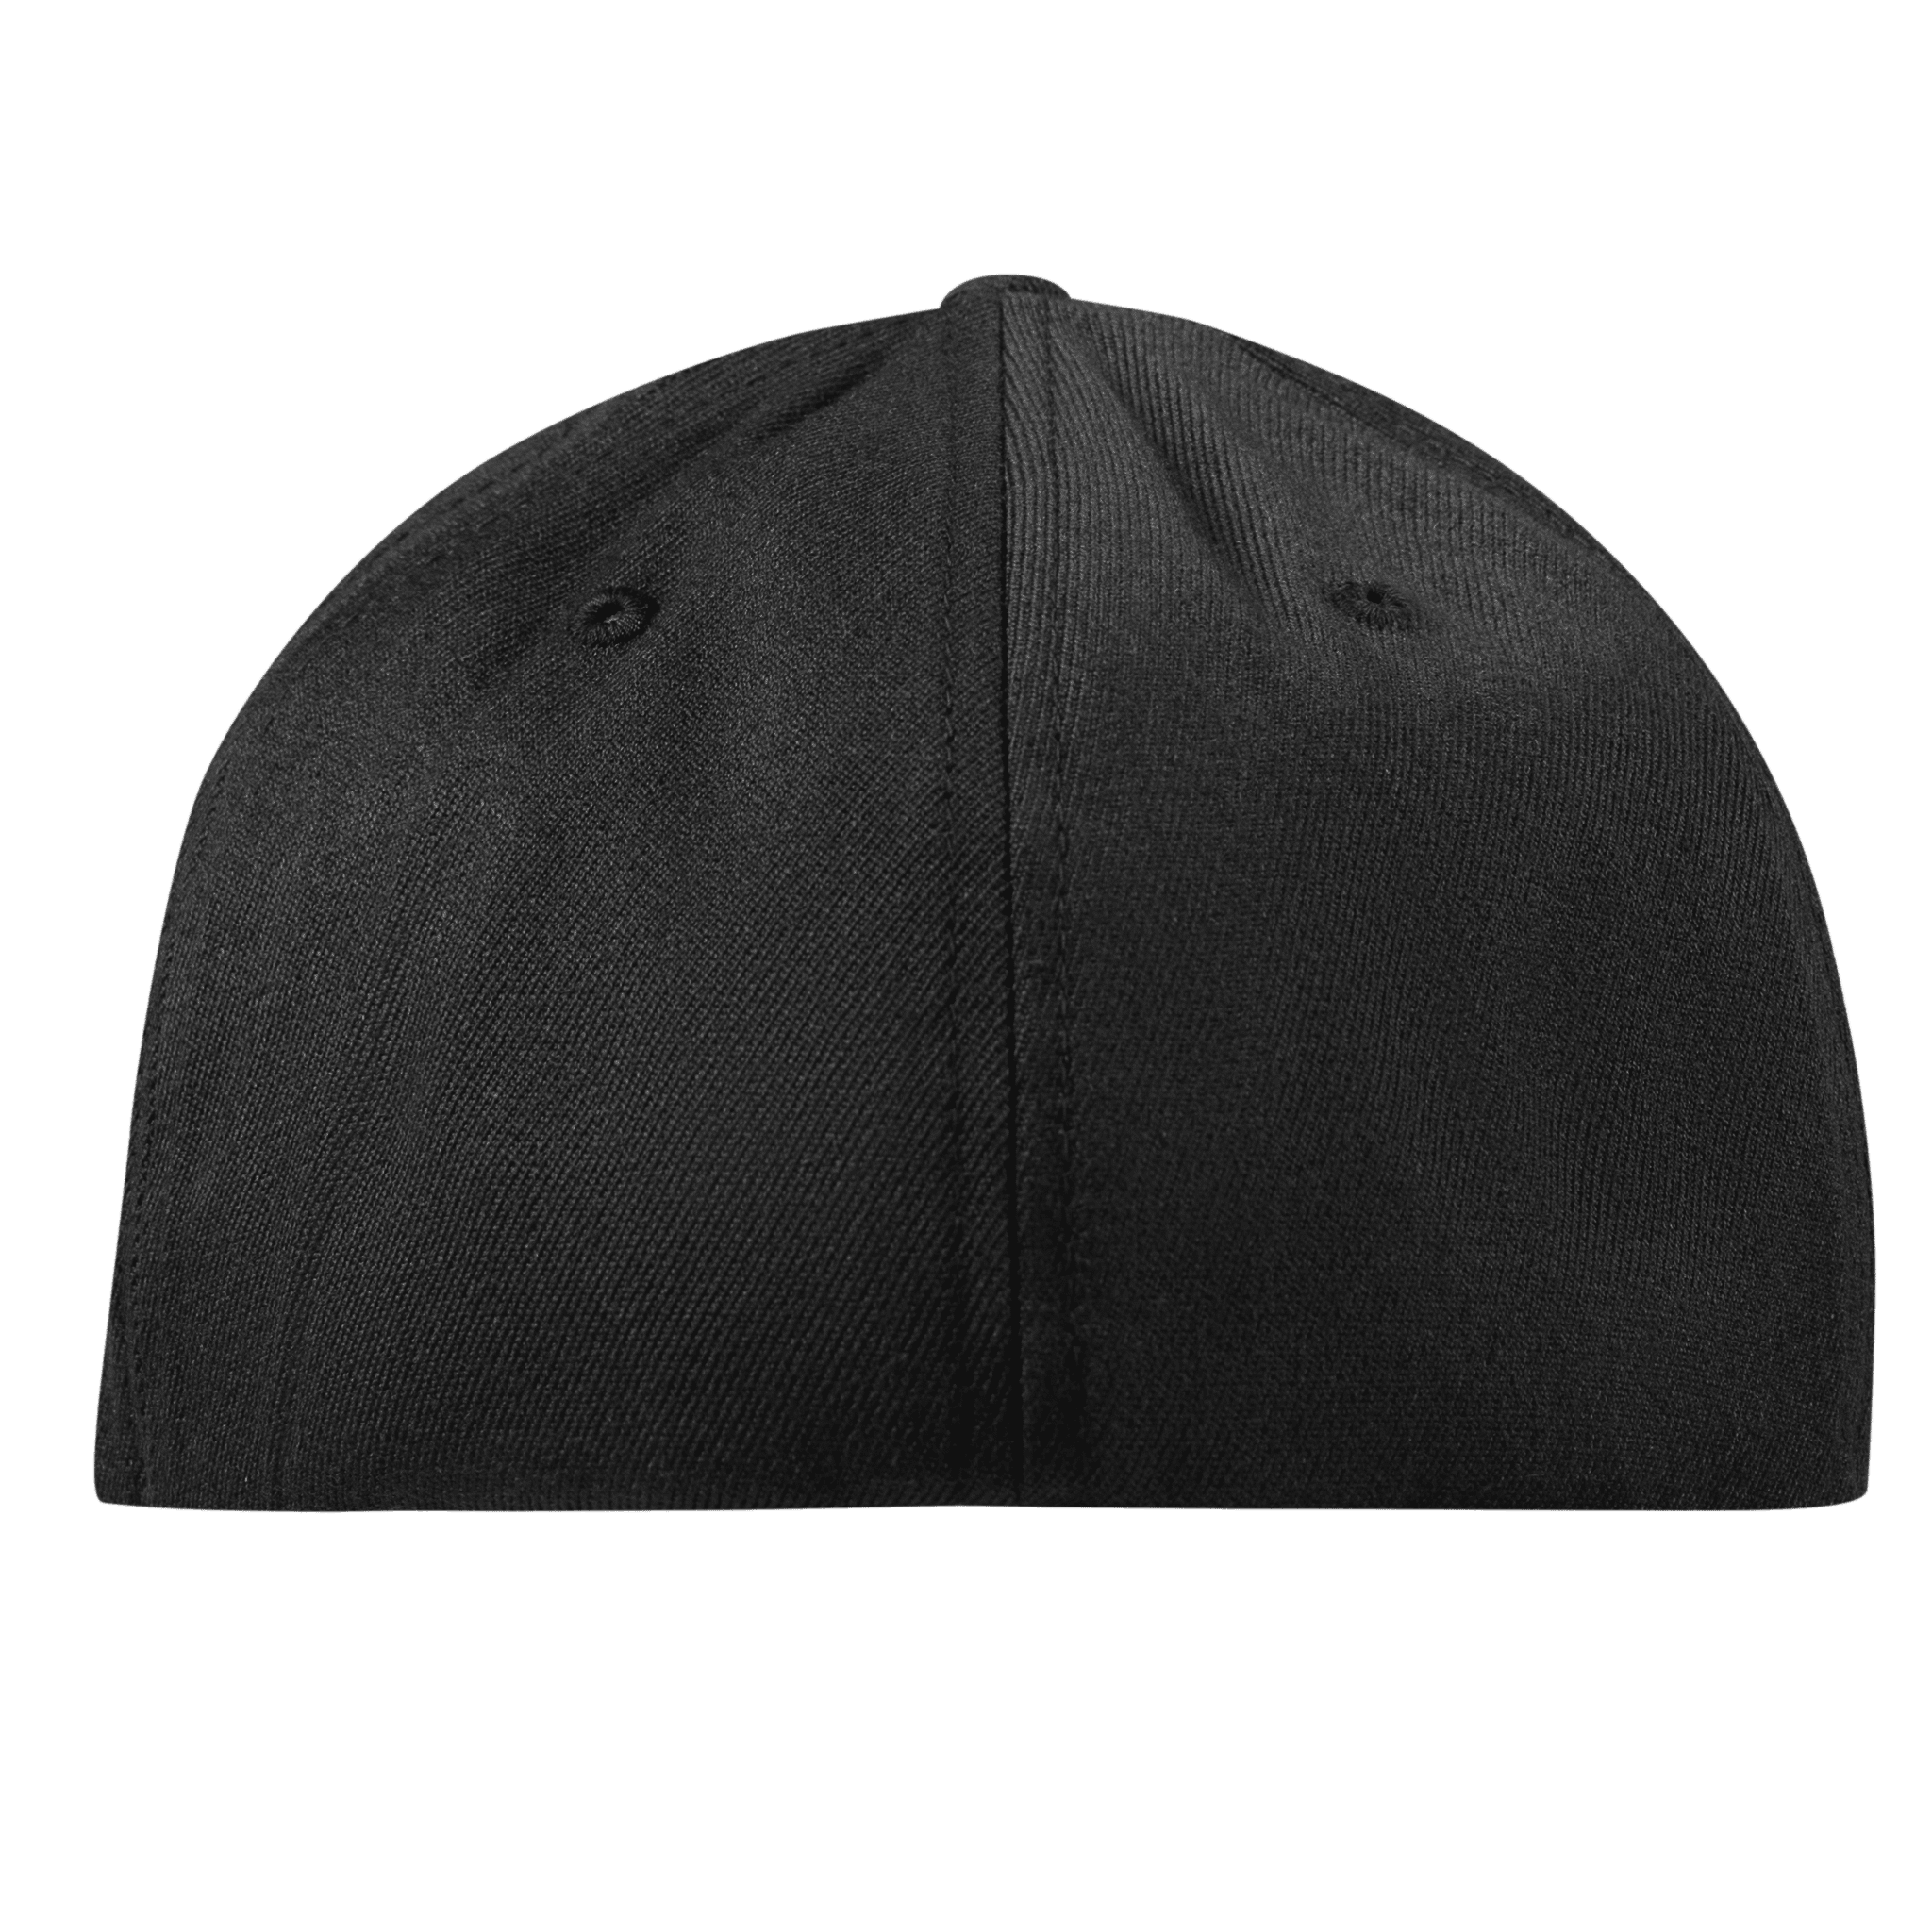 Indiana 19 PVC Flexfit Fitted Back Black